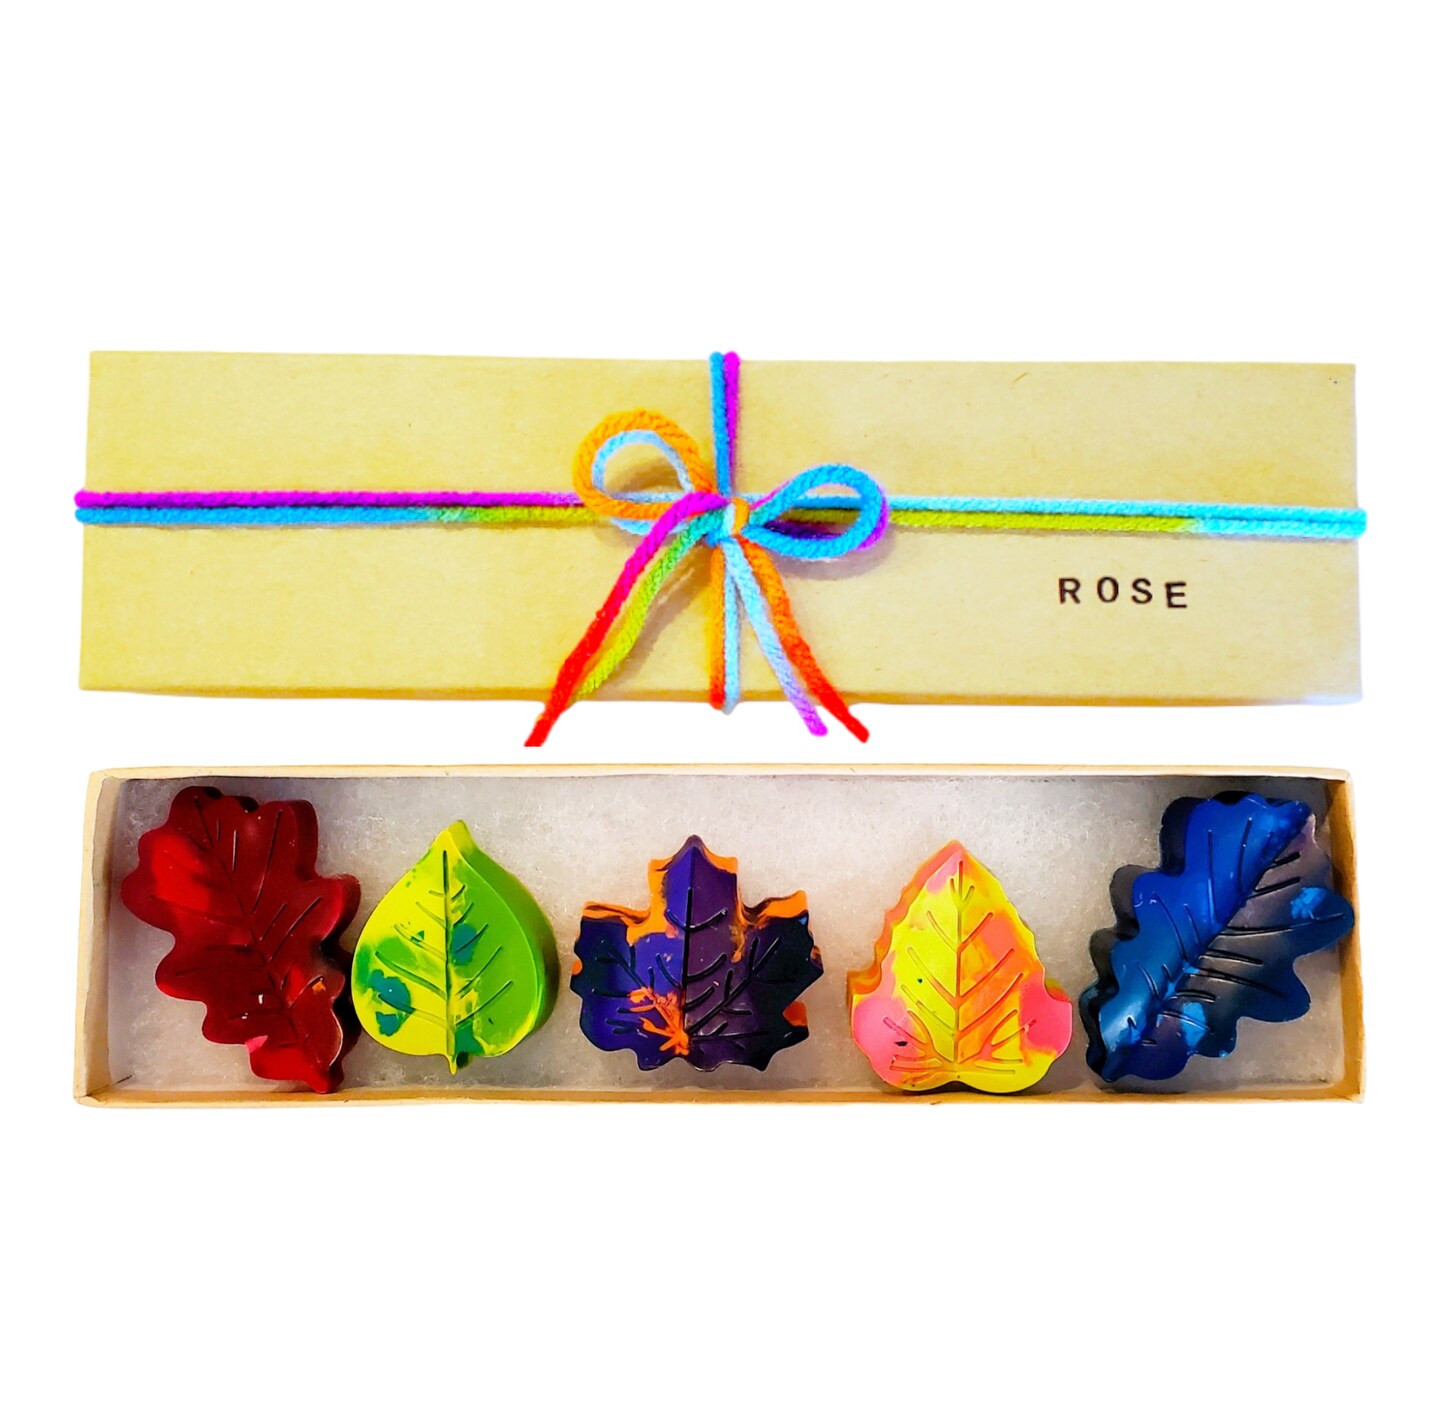 Leaf Crayons Fall Crayons Fall Party Favors Fall Birthday Party Favors  Autumn Party Favors Rainbow Crayons Fall Festival Party Favor